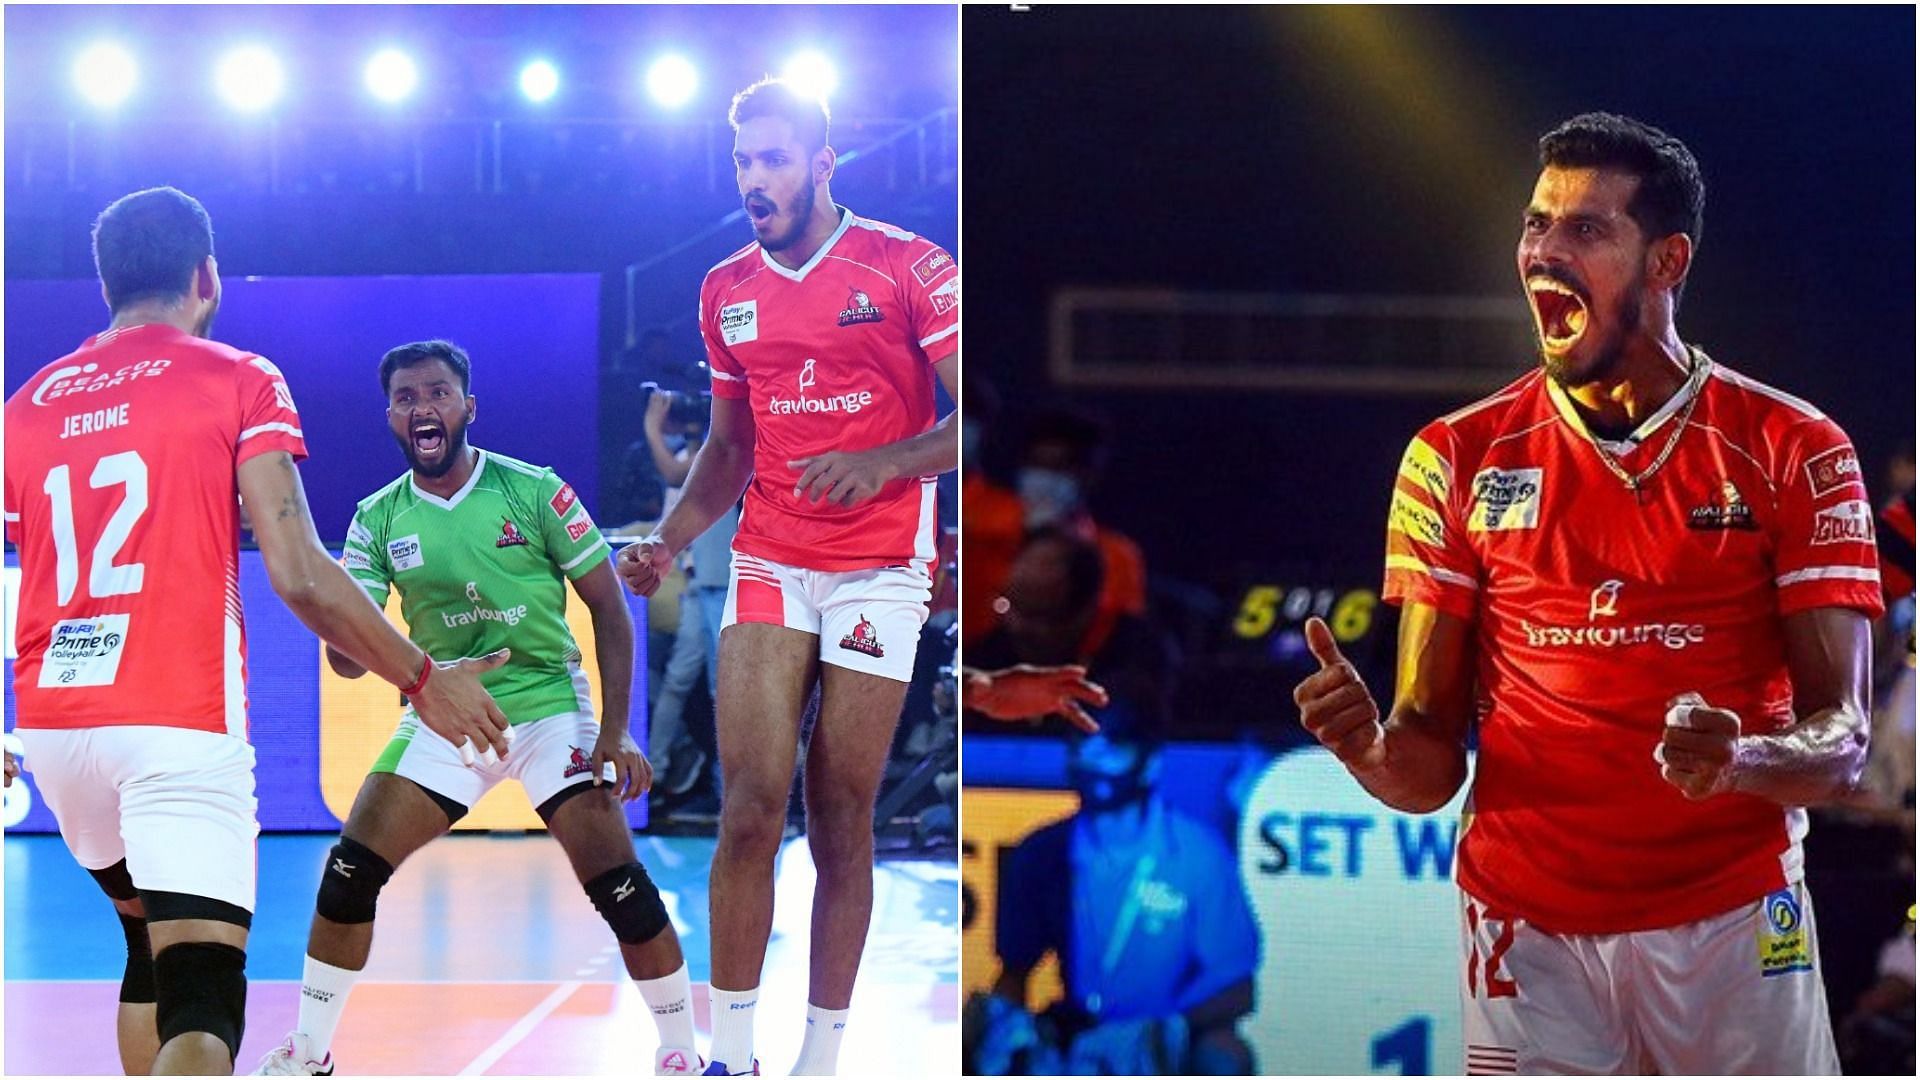 PVL 2022: Calicut Heroes in action (Pic Credit: PVL)